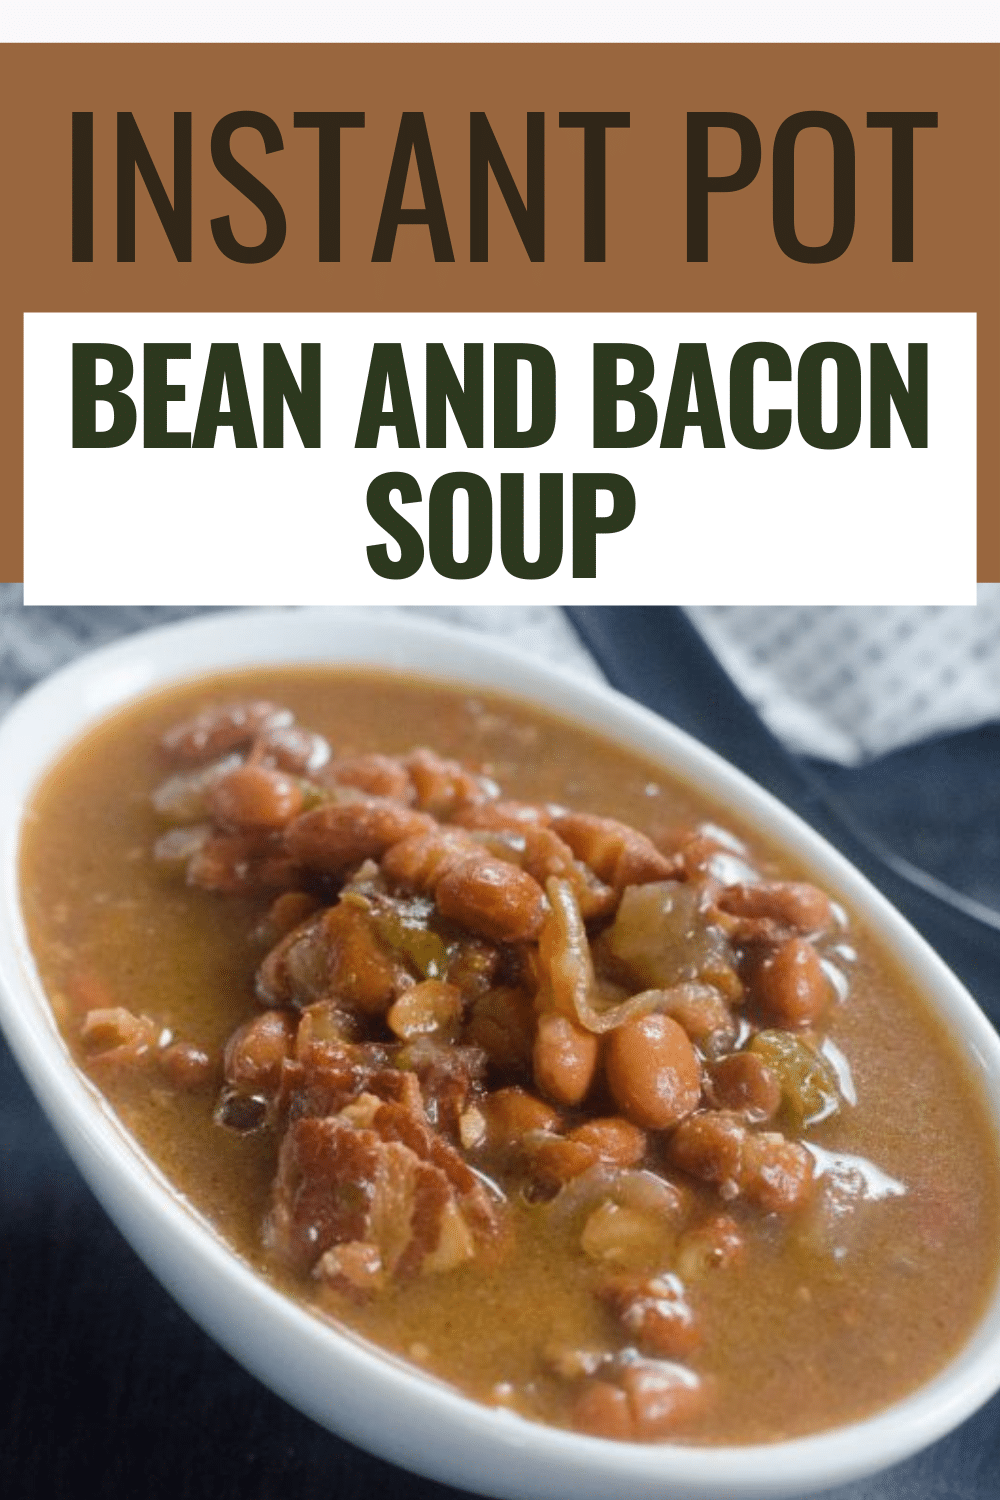 Comforting, easy and super delicious- You just can't go wrong with this instant pot bean and bacon soup for a lazy day's dinner. #instantpot #pressurecooker #soup #beanandbaconsoup via @wondermomwannab